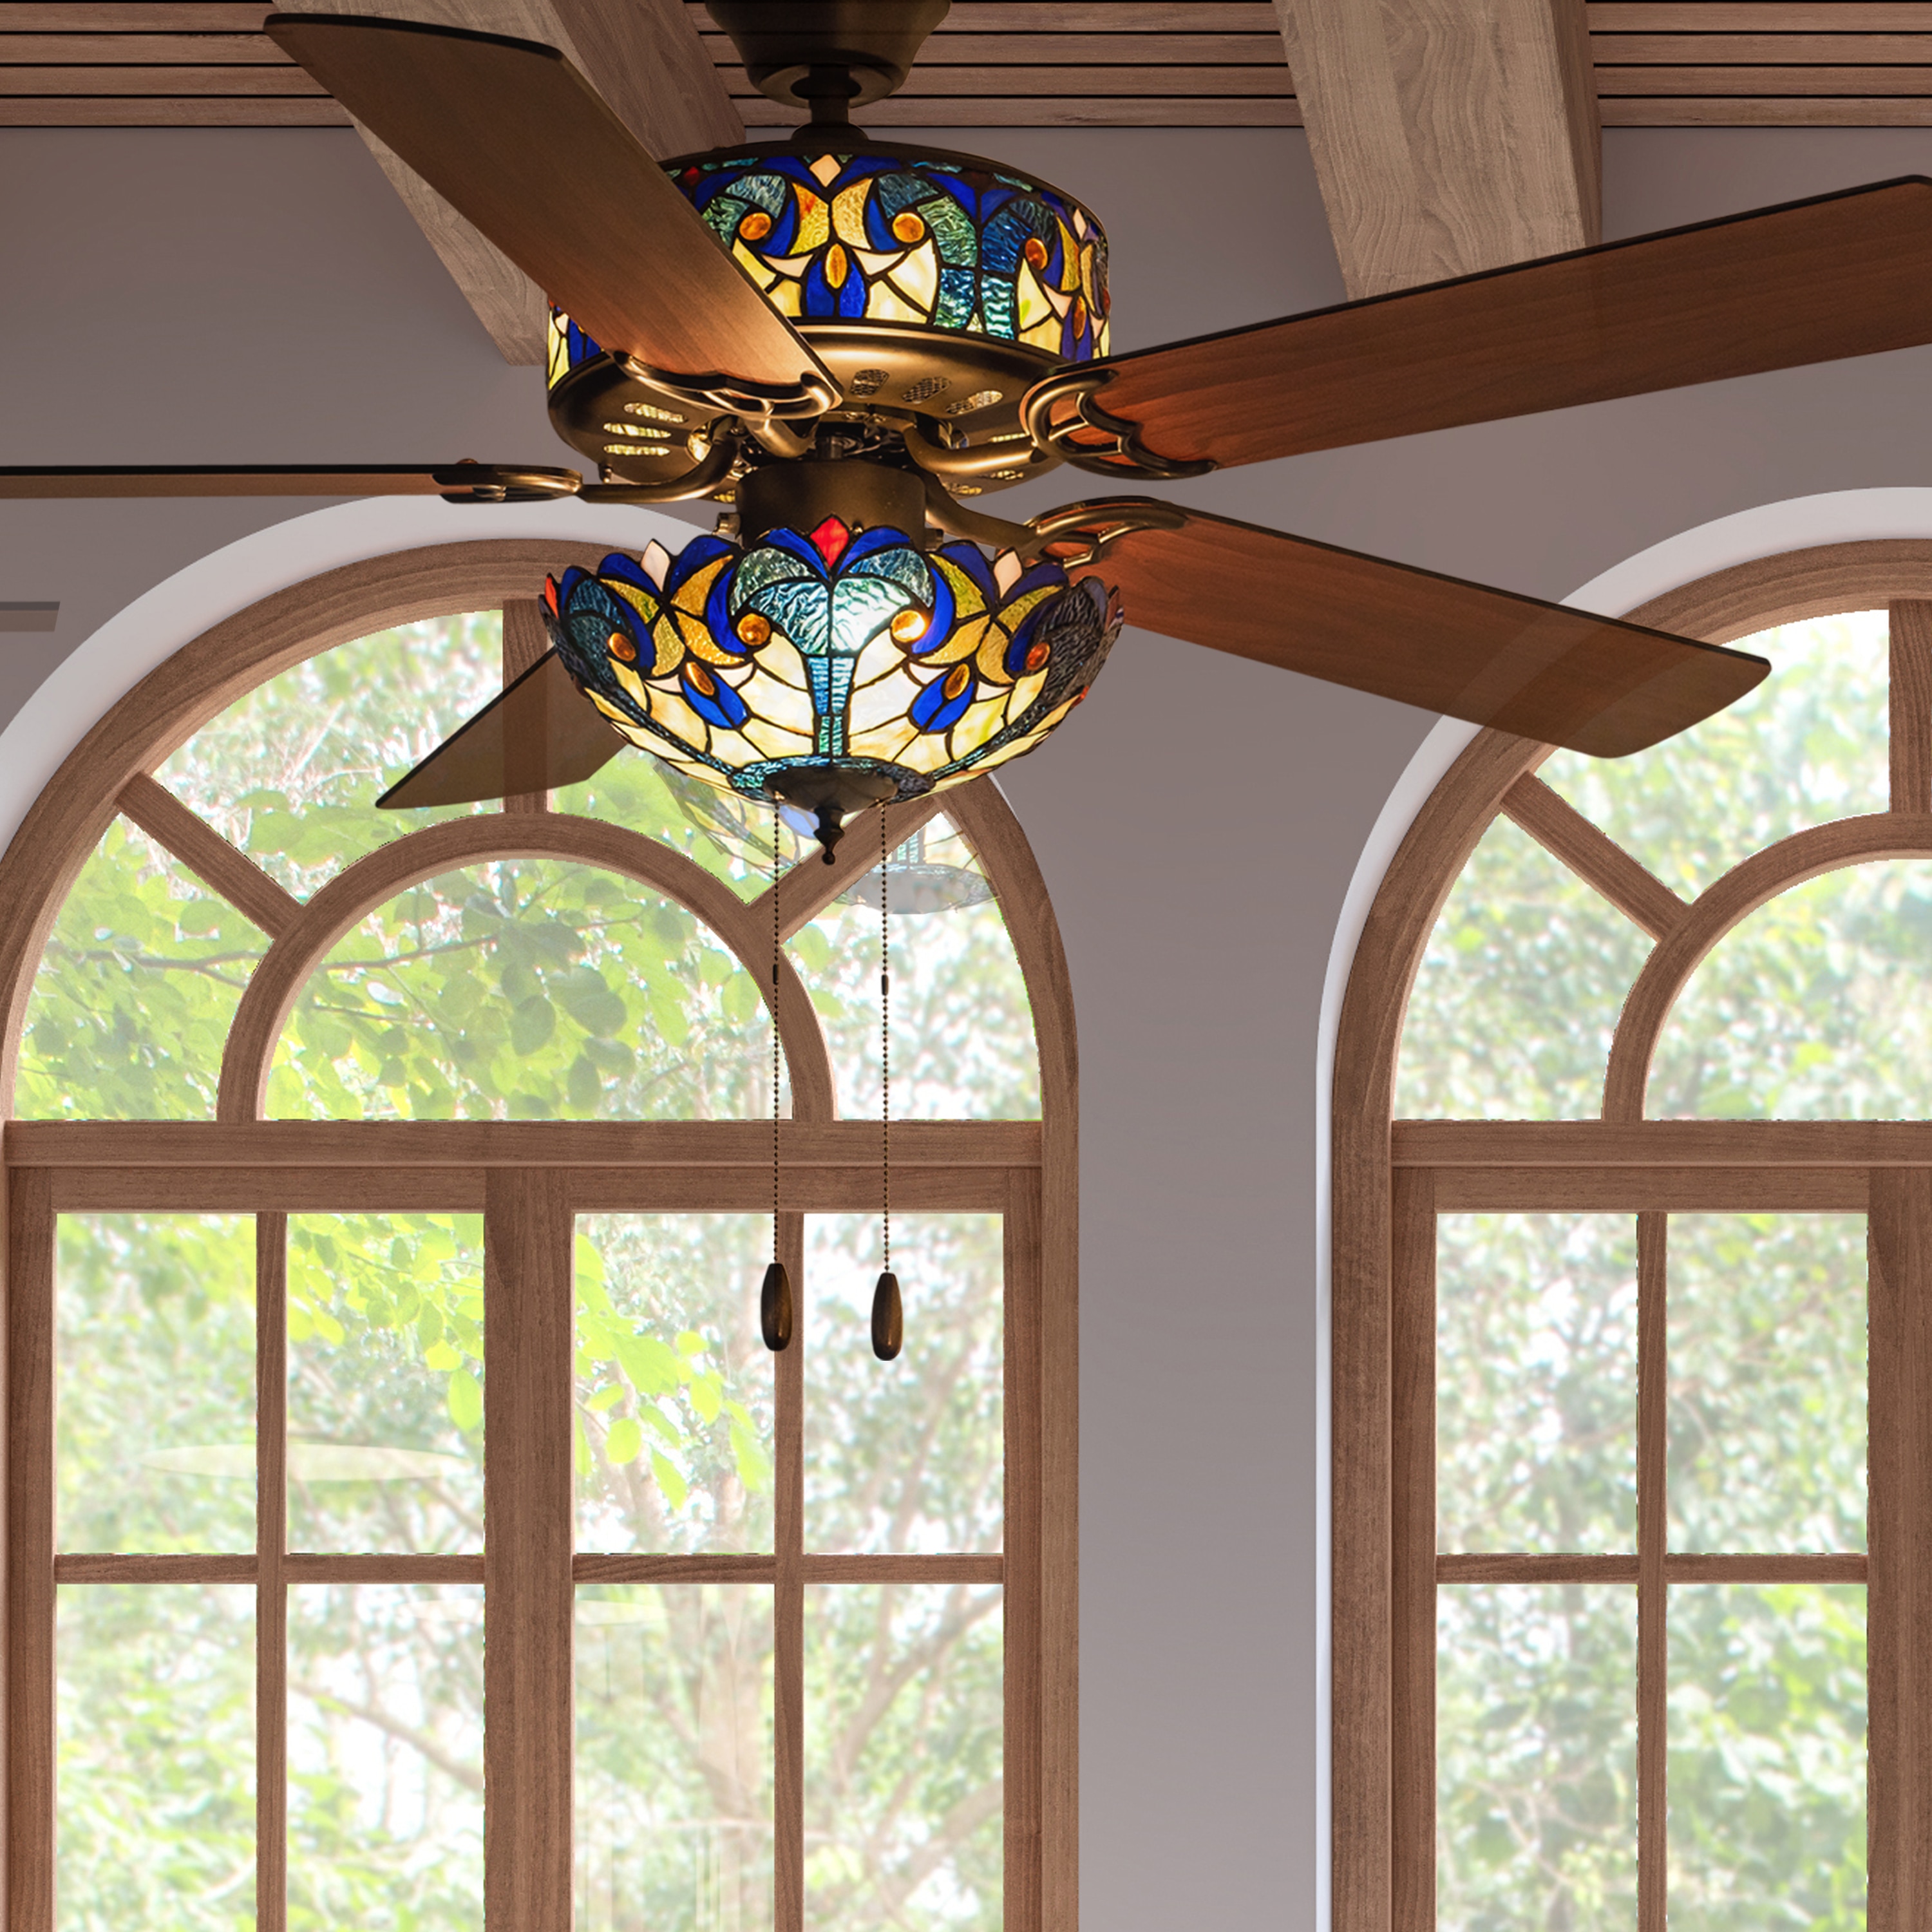 River of Goods 52-in Bronze LED Indoor Downrod or Flush Mount Ceiling Fan  with Light (5-Blade)